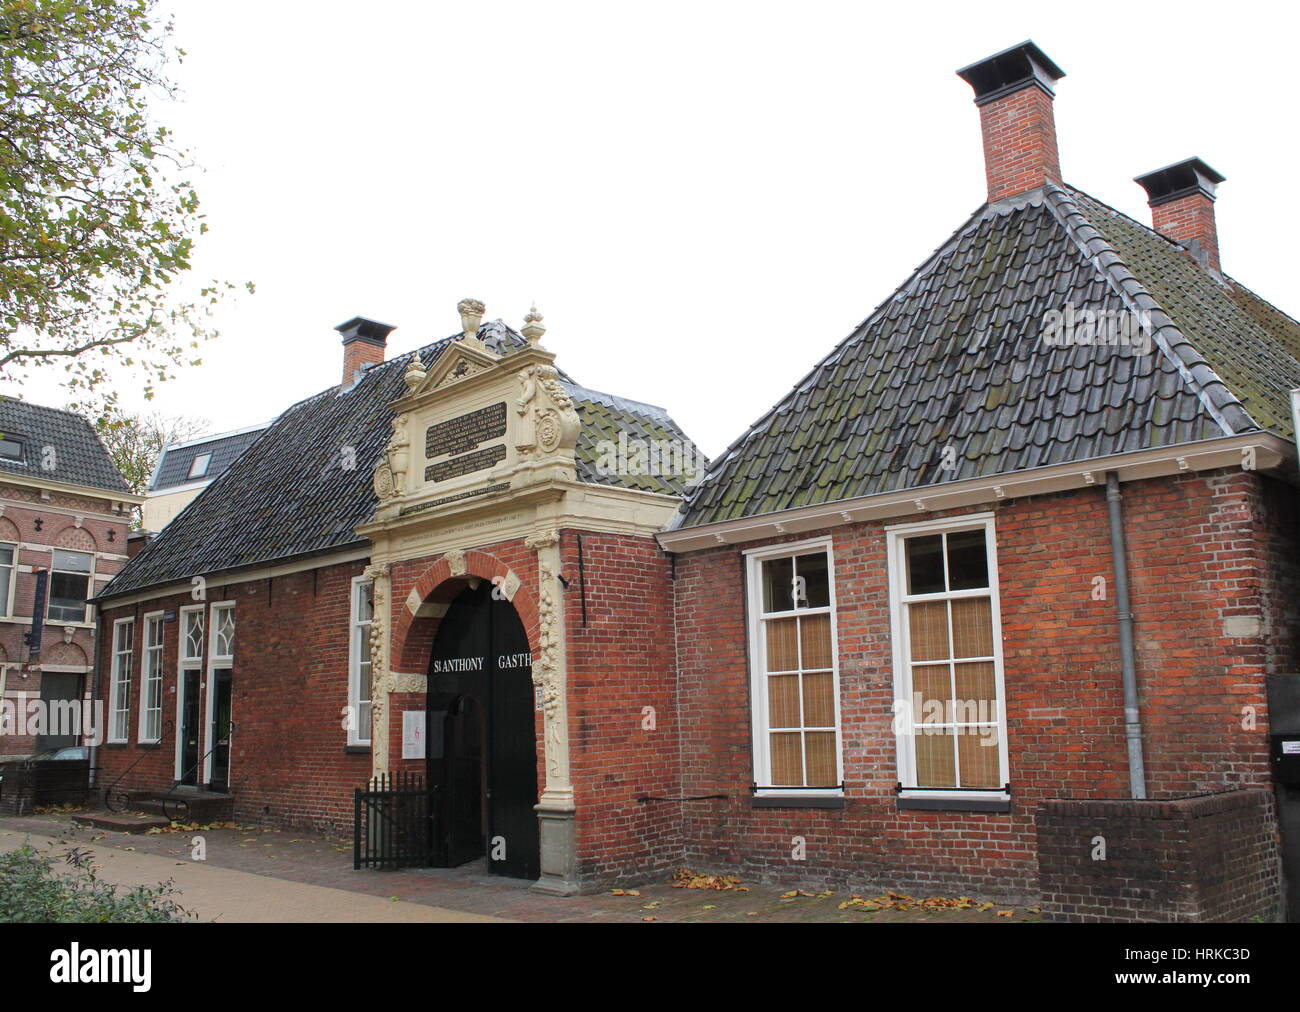 Main entrance to Sint Anthonygasthuis (Saint Antony's Hofje = courtyard with Almshouses), inner city of Groningen, Netherlands. Founded in 1517. Stock Photo